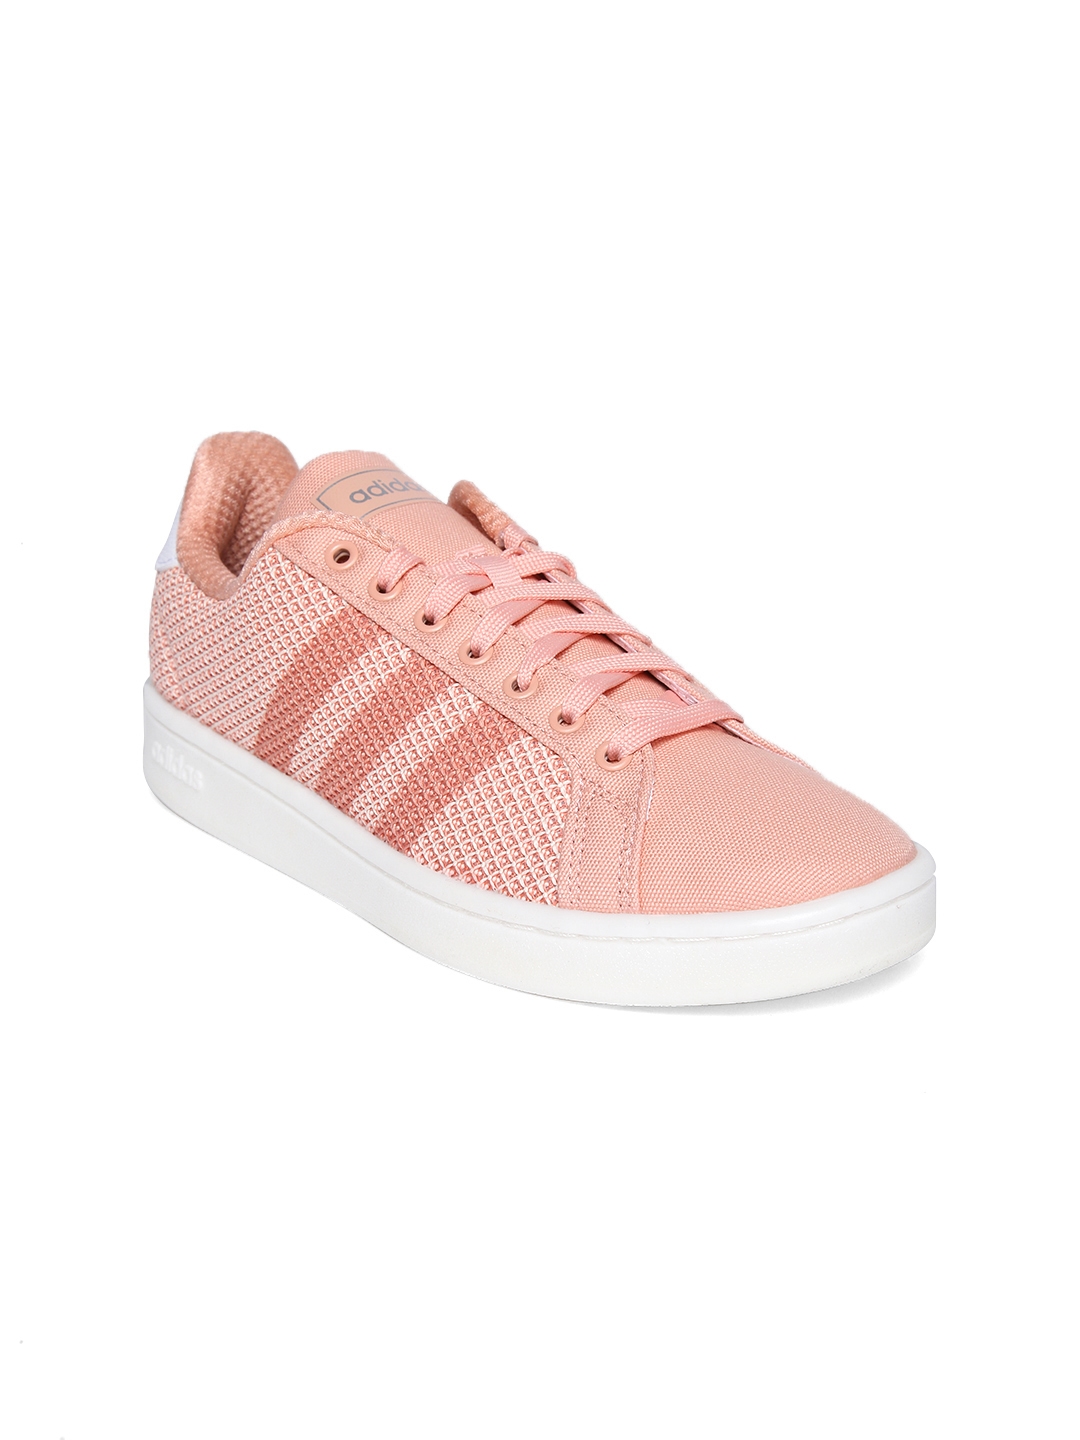 adidas womens casual shoes